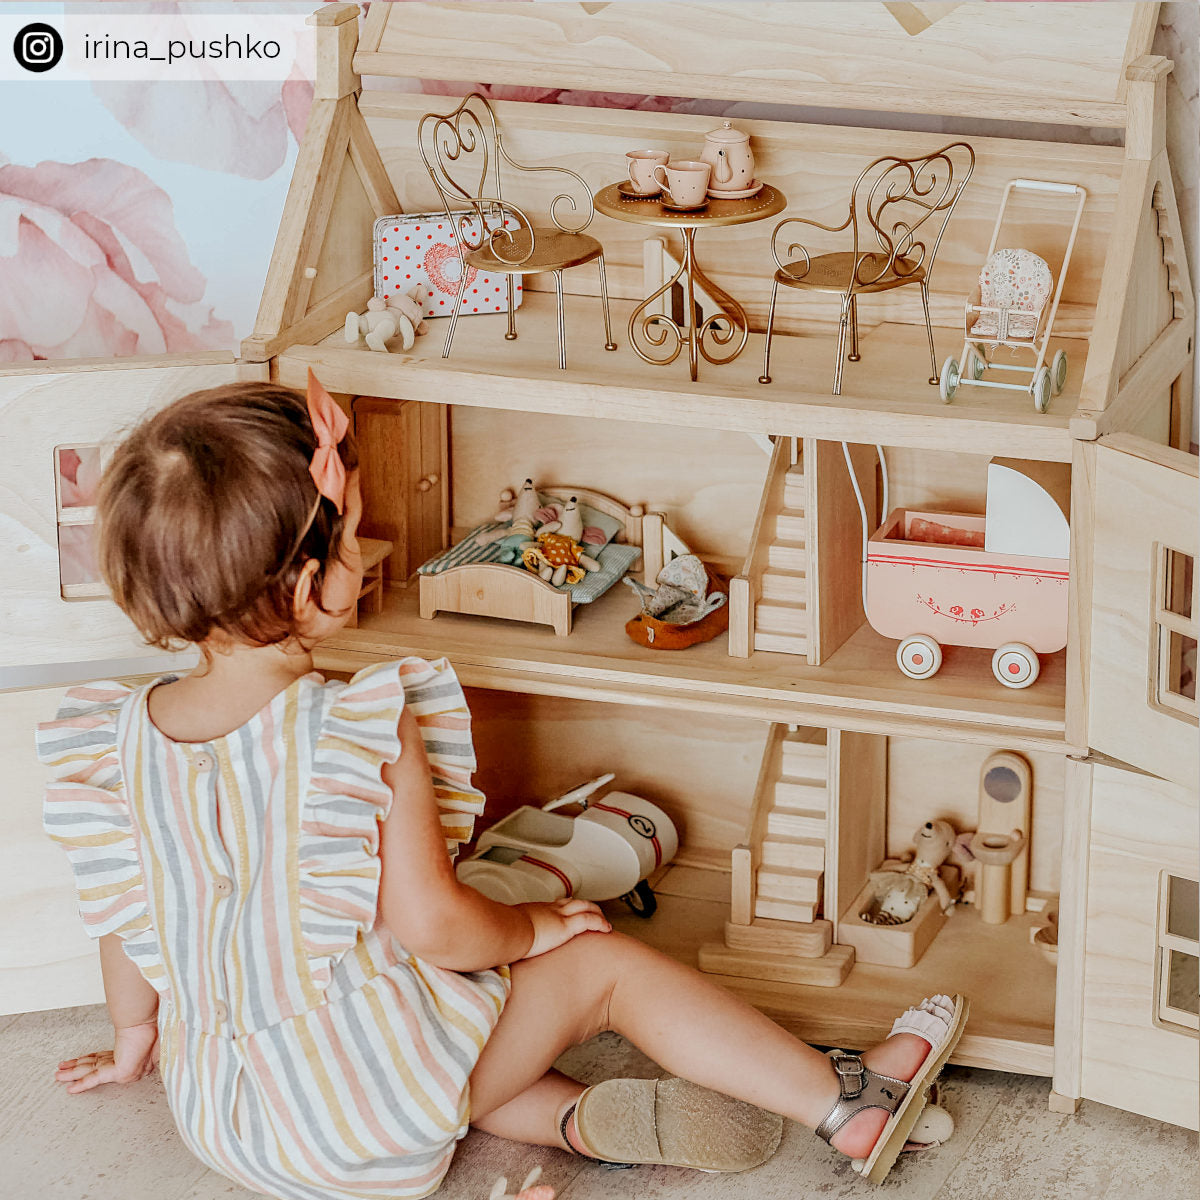 Plan Toys Victorian Doll House – My Sweet Muffin